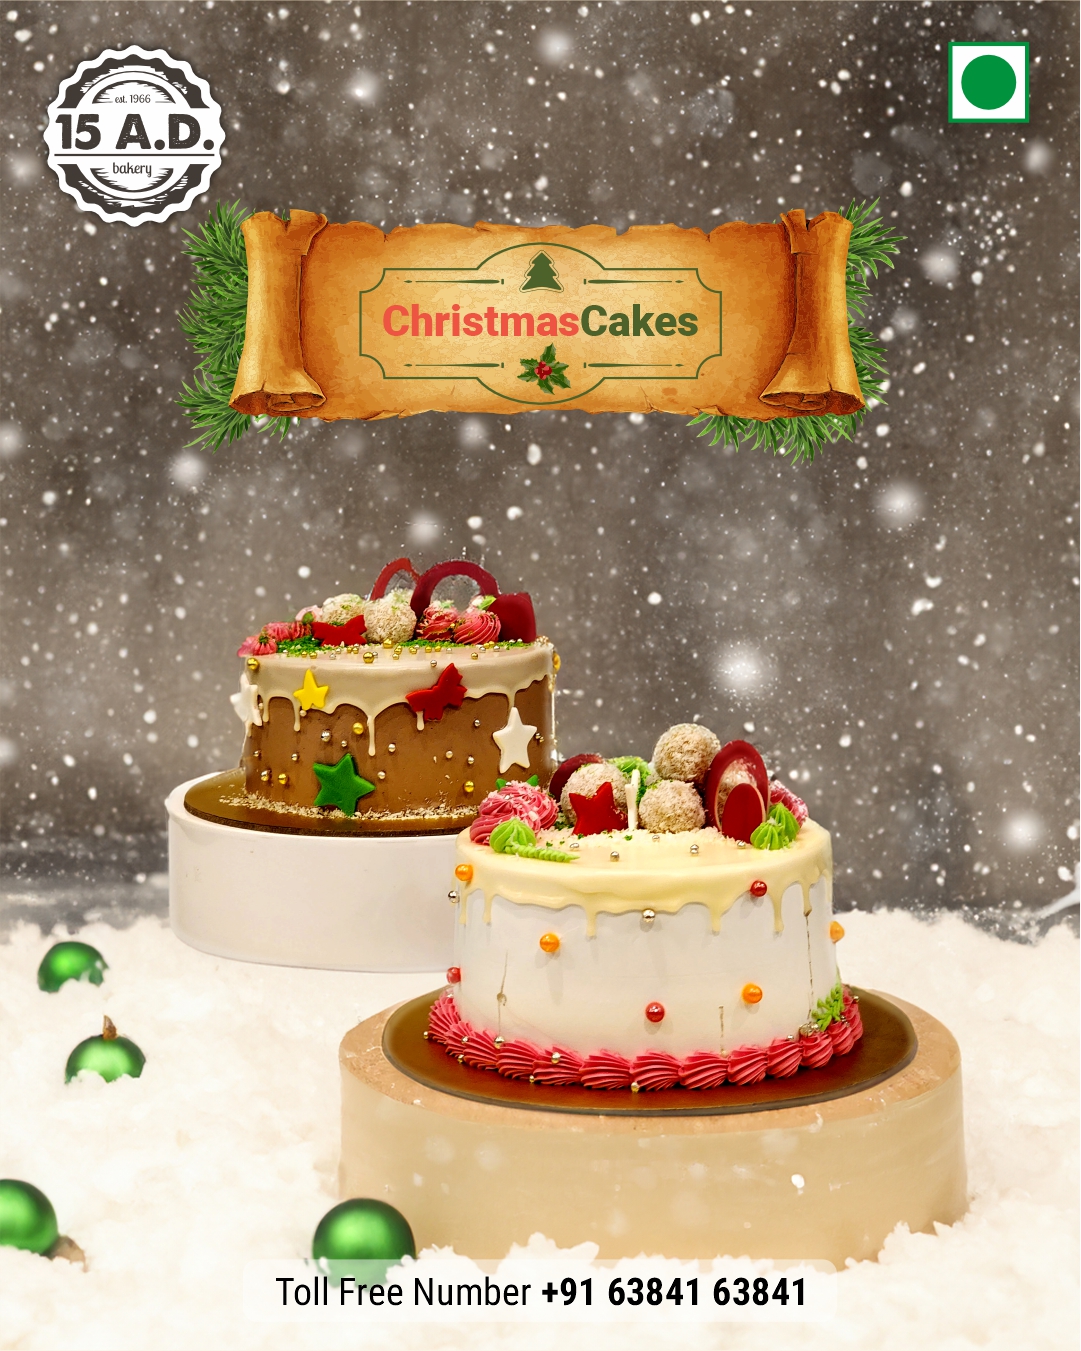 Christmas Cake by 15 AD Bakery